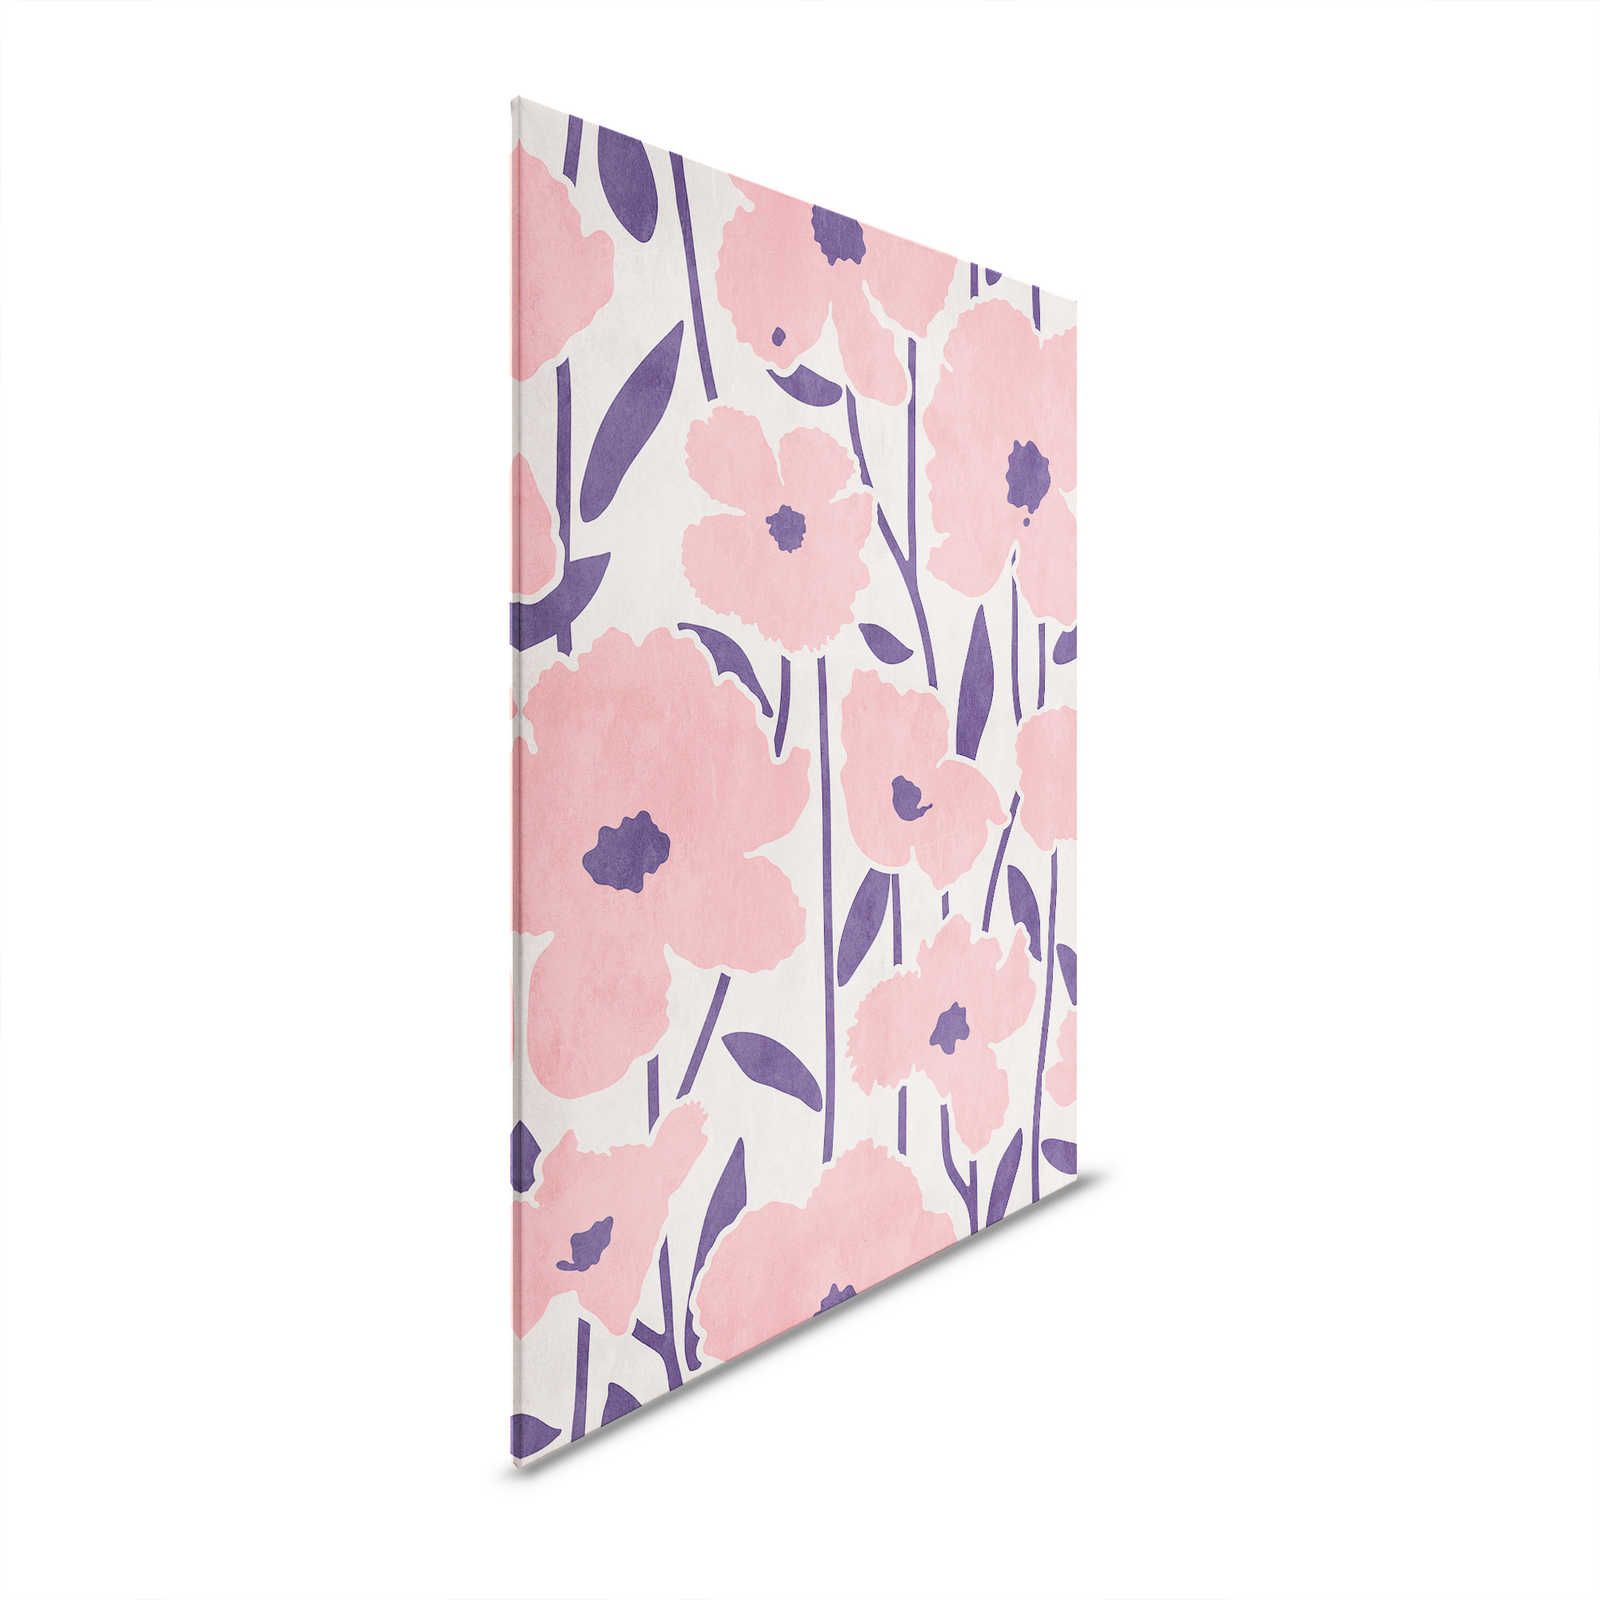 Flower Market 1 - Floral Canvas Painting Pink Flowers Pattern & Rendering - 0.60 m x 0.90 m
